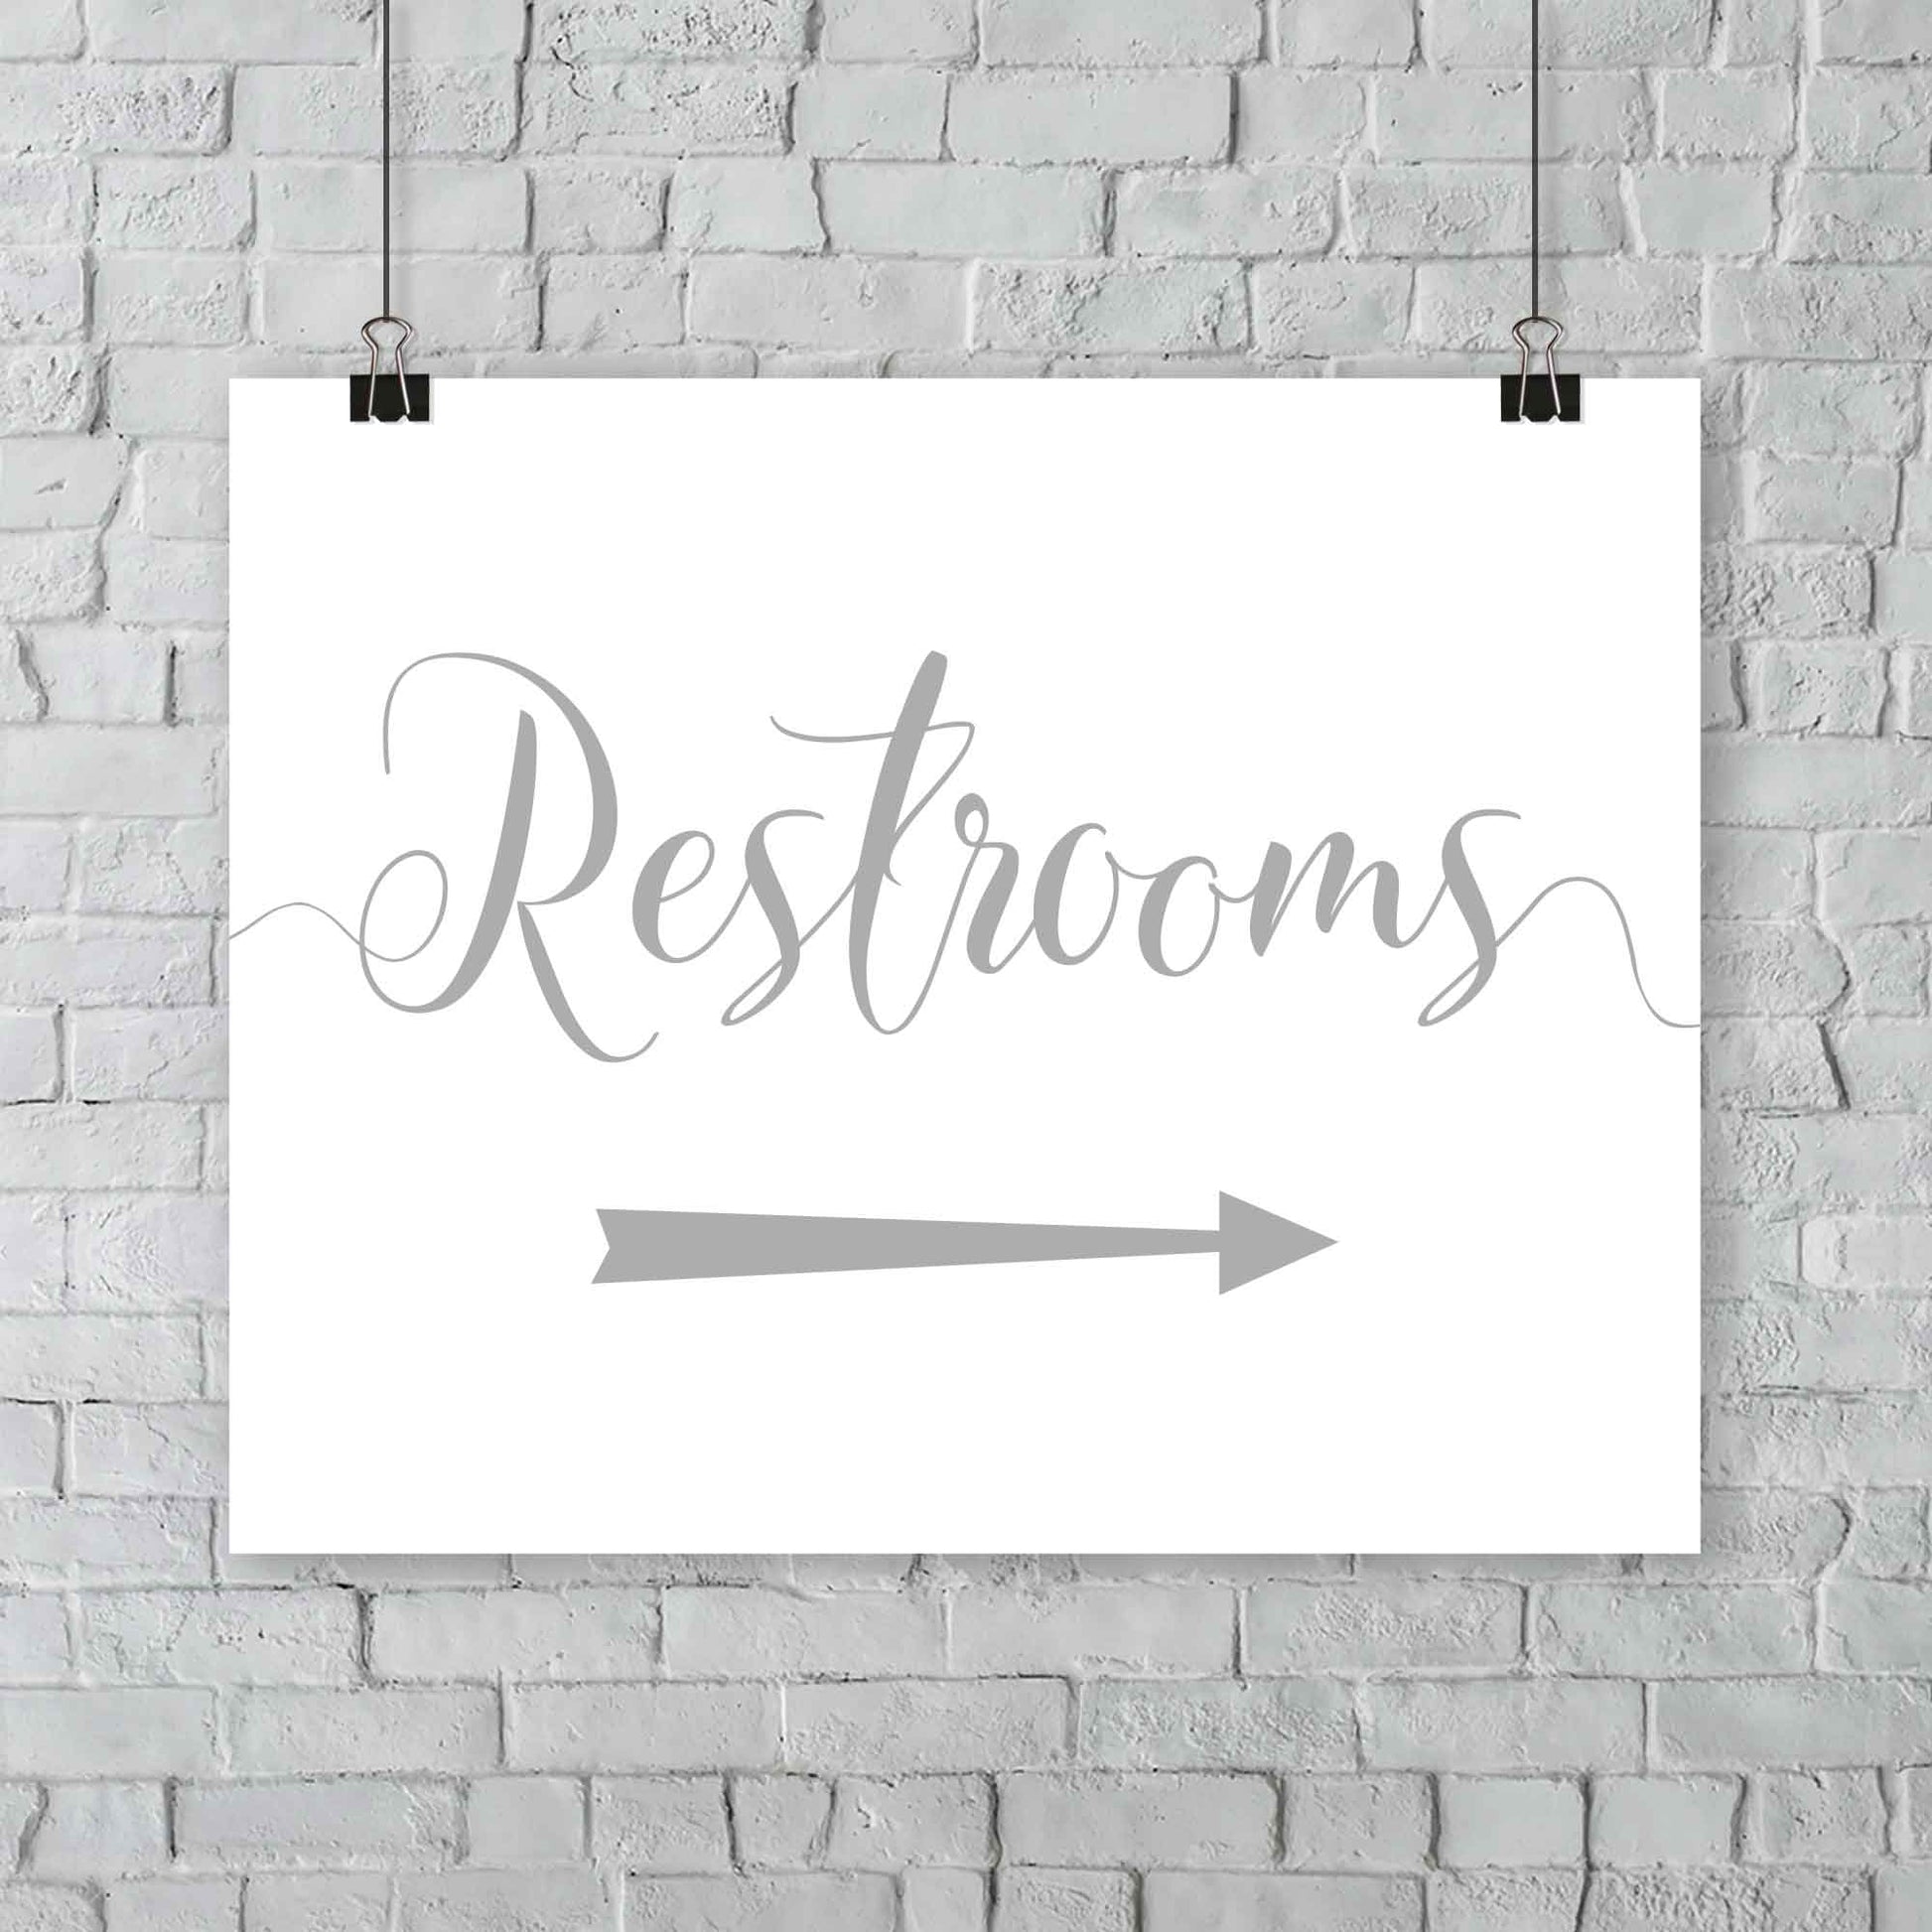 silver wedding restrooms arrow signage hanging from a wall